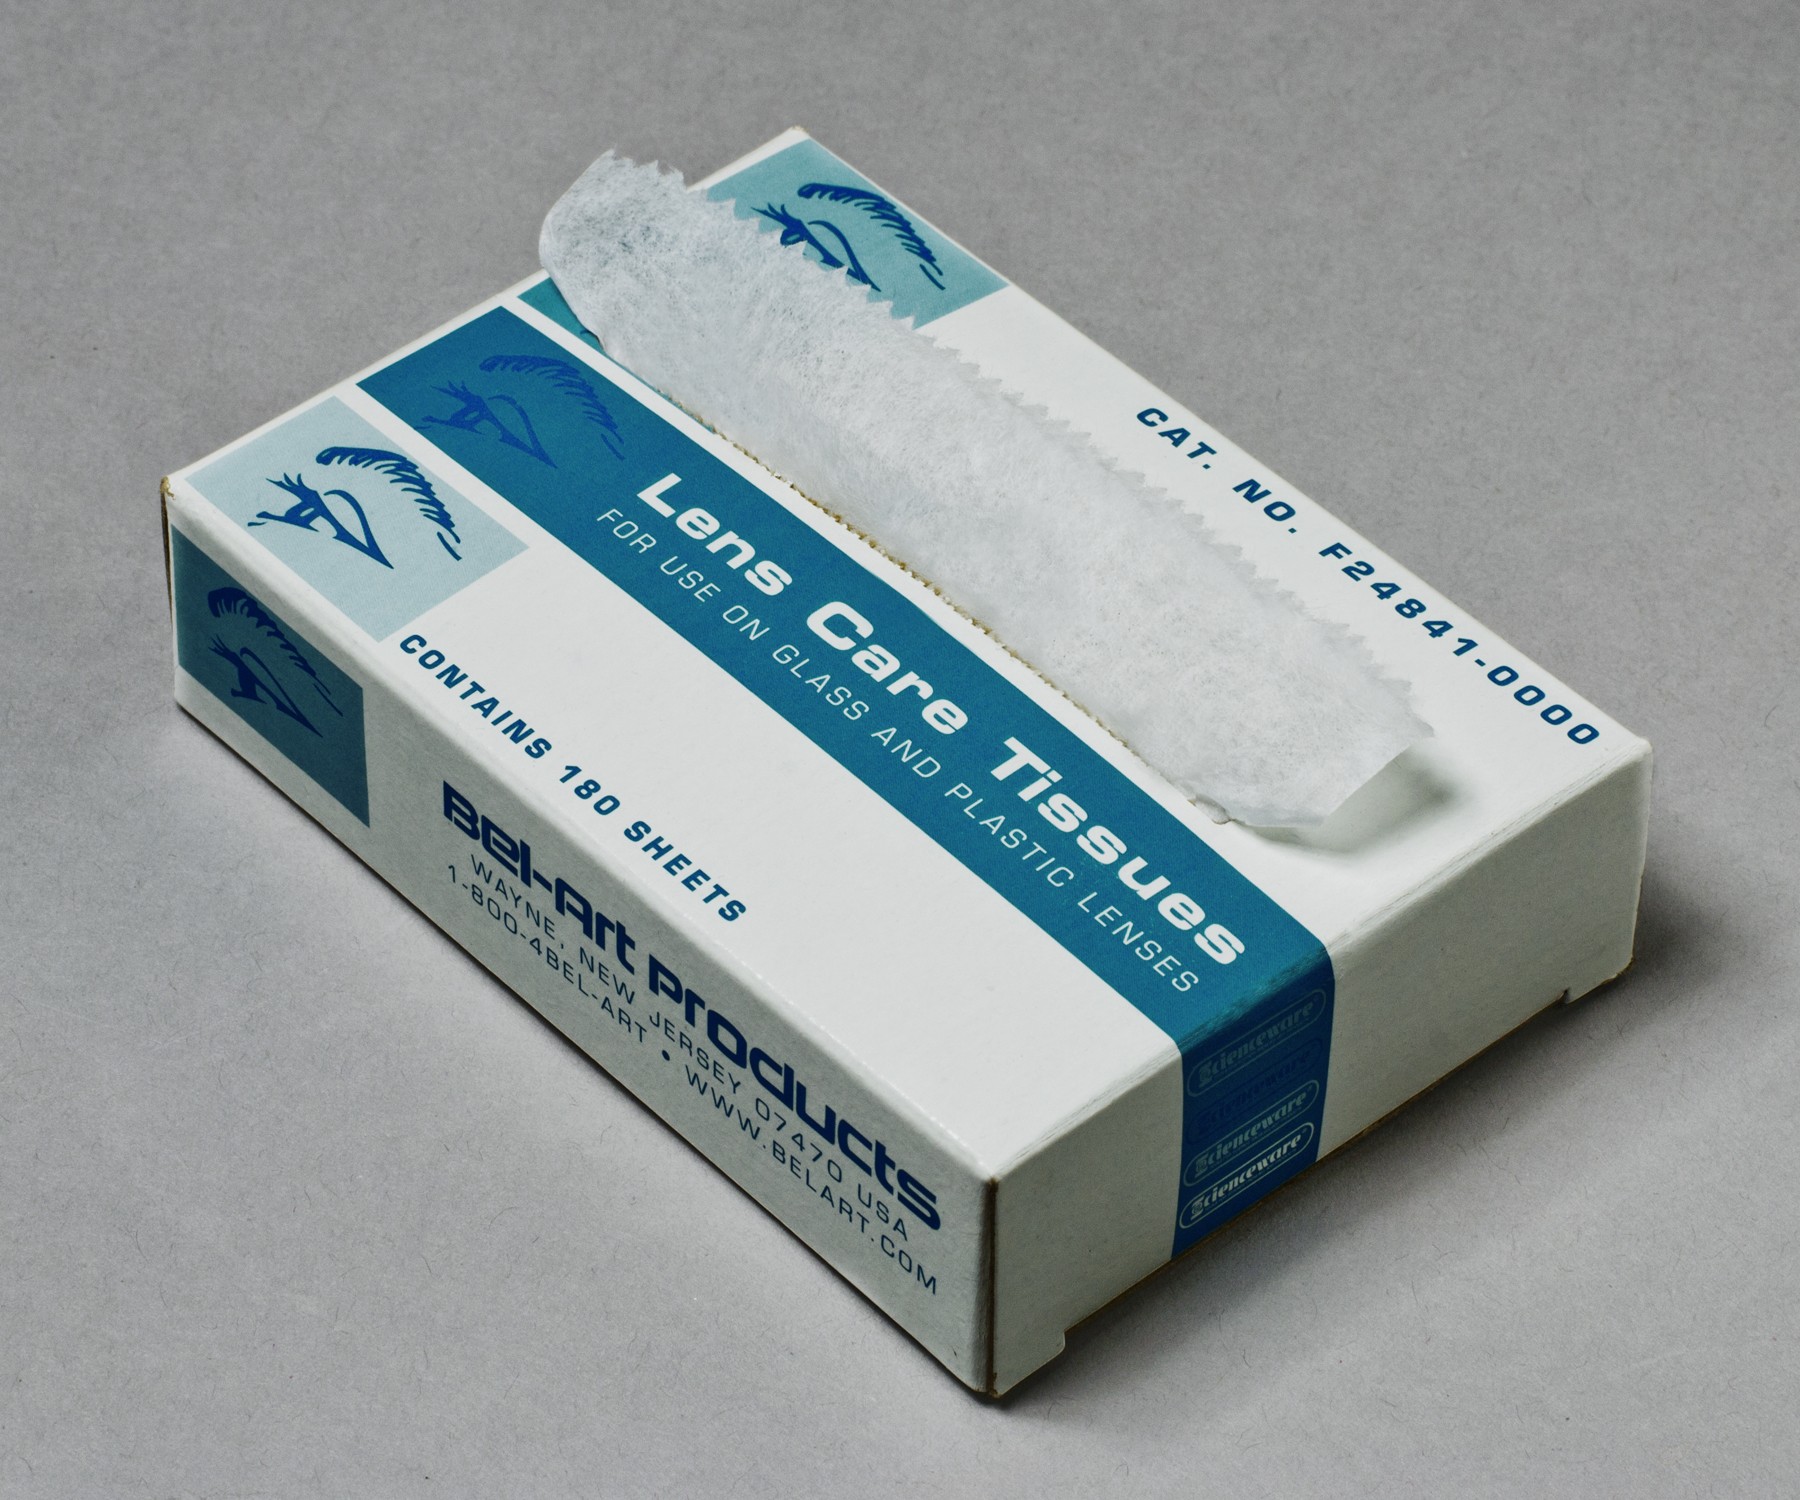 SP Bel-Art Silicon-Free Lens Cleaning Tissues; 180 Sheets